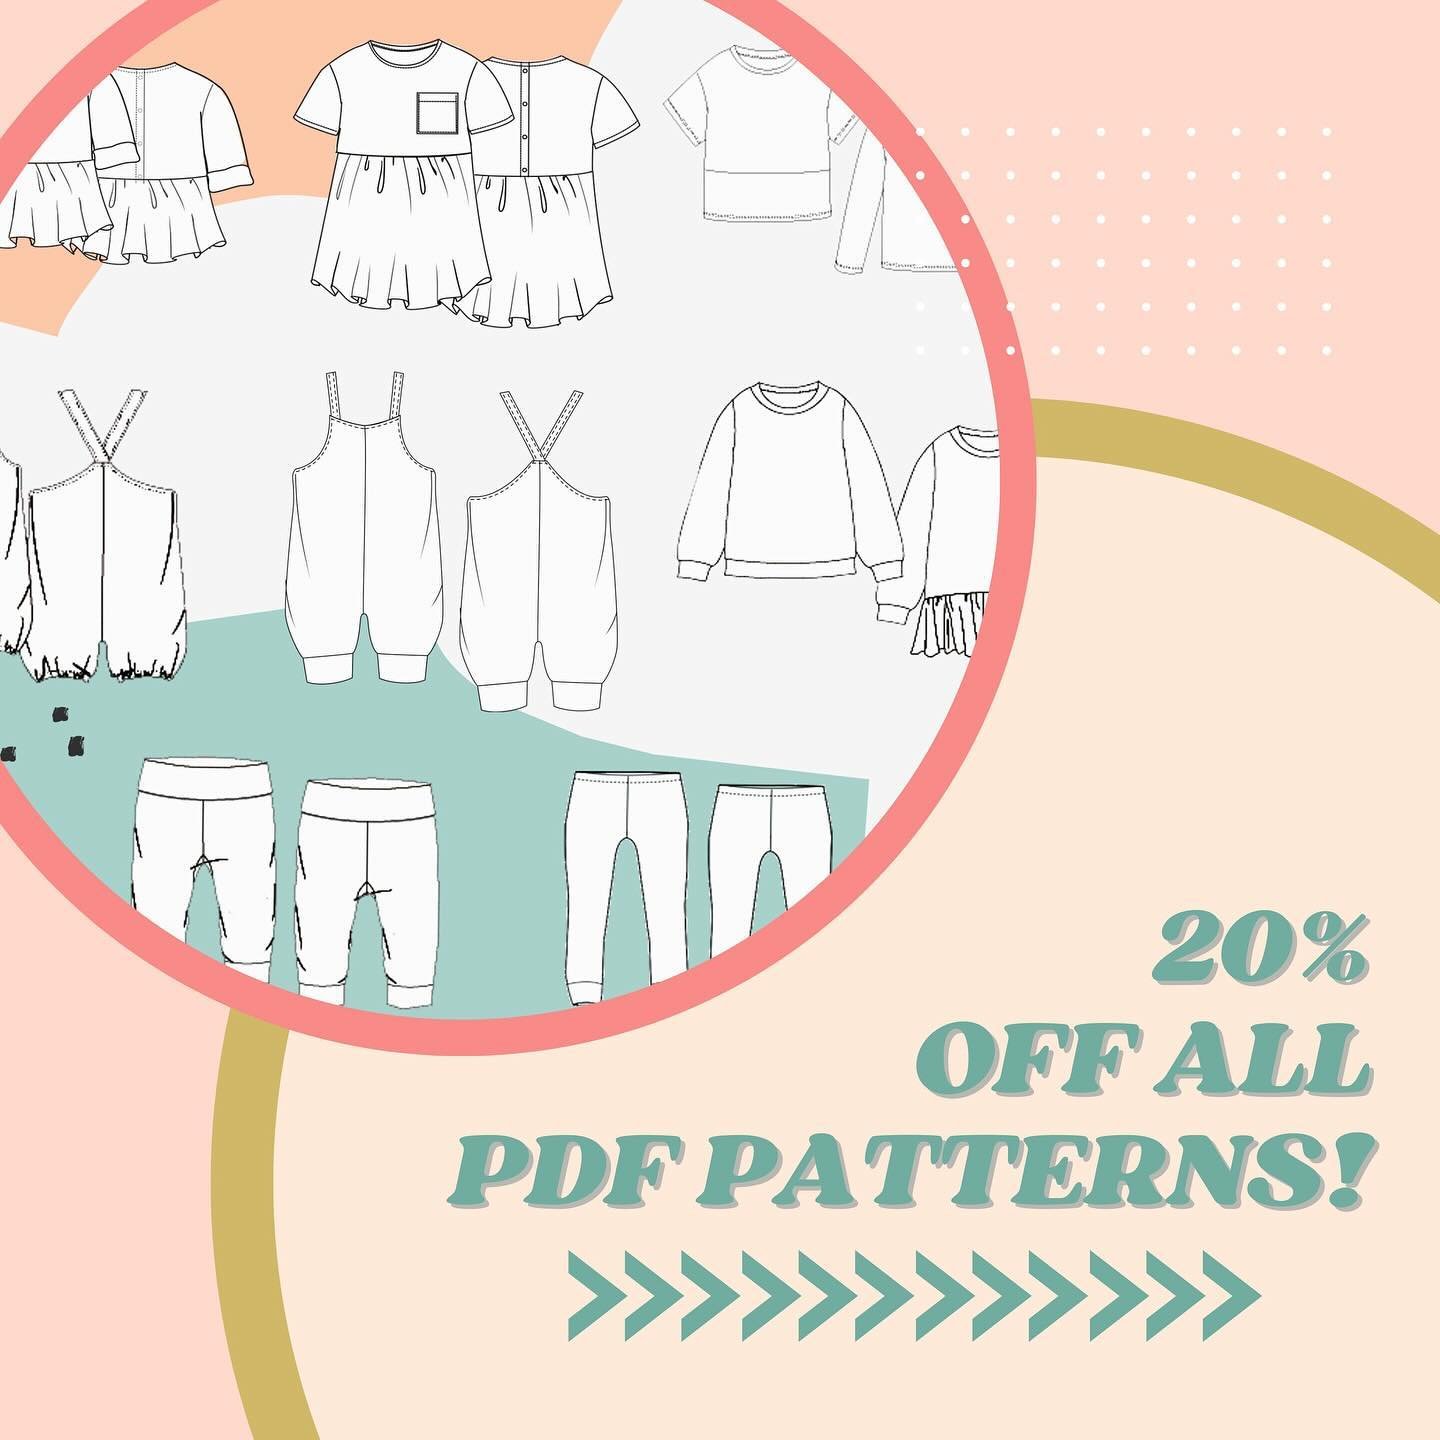 I wanted to make sure you didn&rsquo;t miss out on my special May Day Bank Holiday offer! Enjoy 20% off all my PDF sewing patterns until midnight on Monday. 🌟
Code: ENJOYBH20

Imagine the smiles on your kids&rsquo; faces as they step out in clothes 